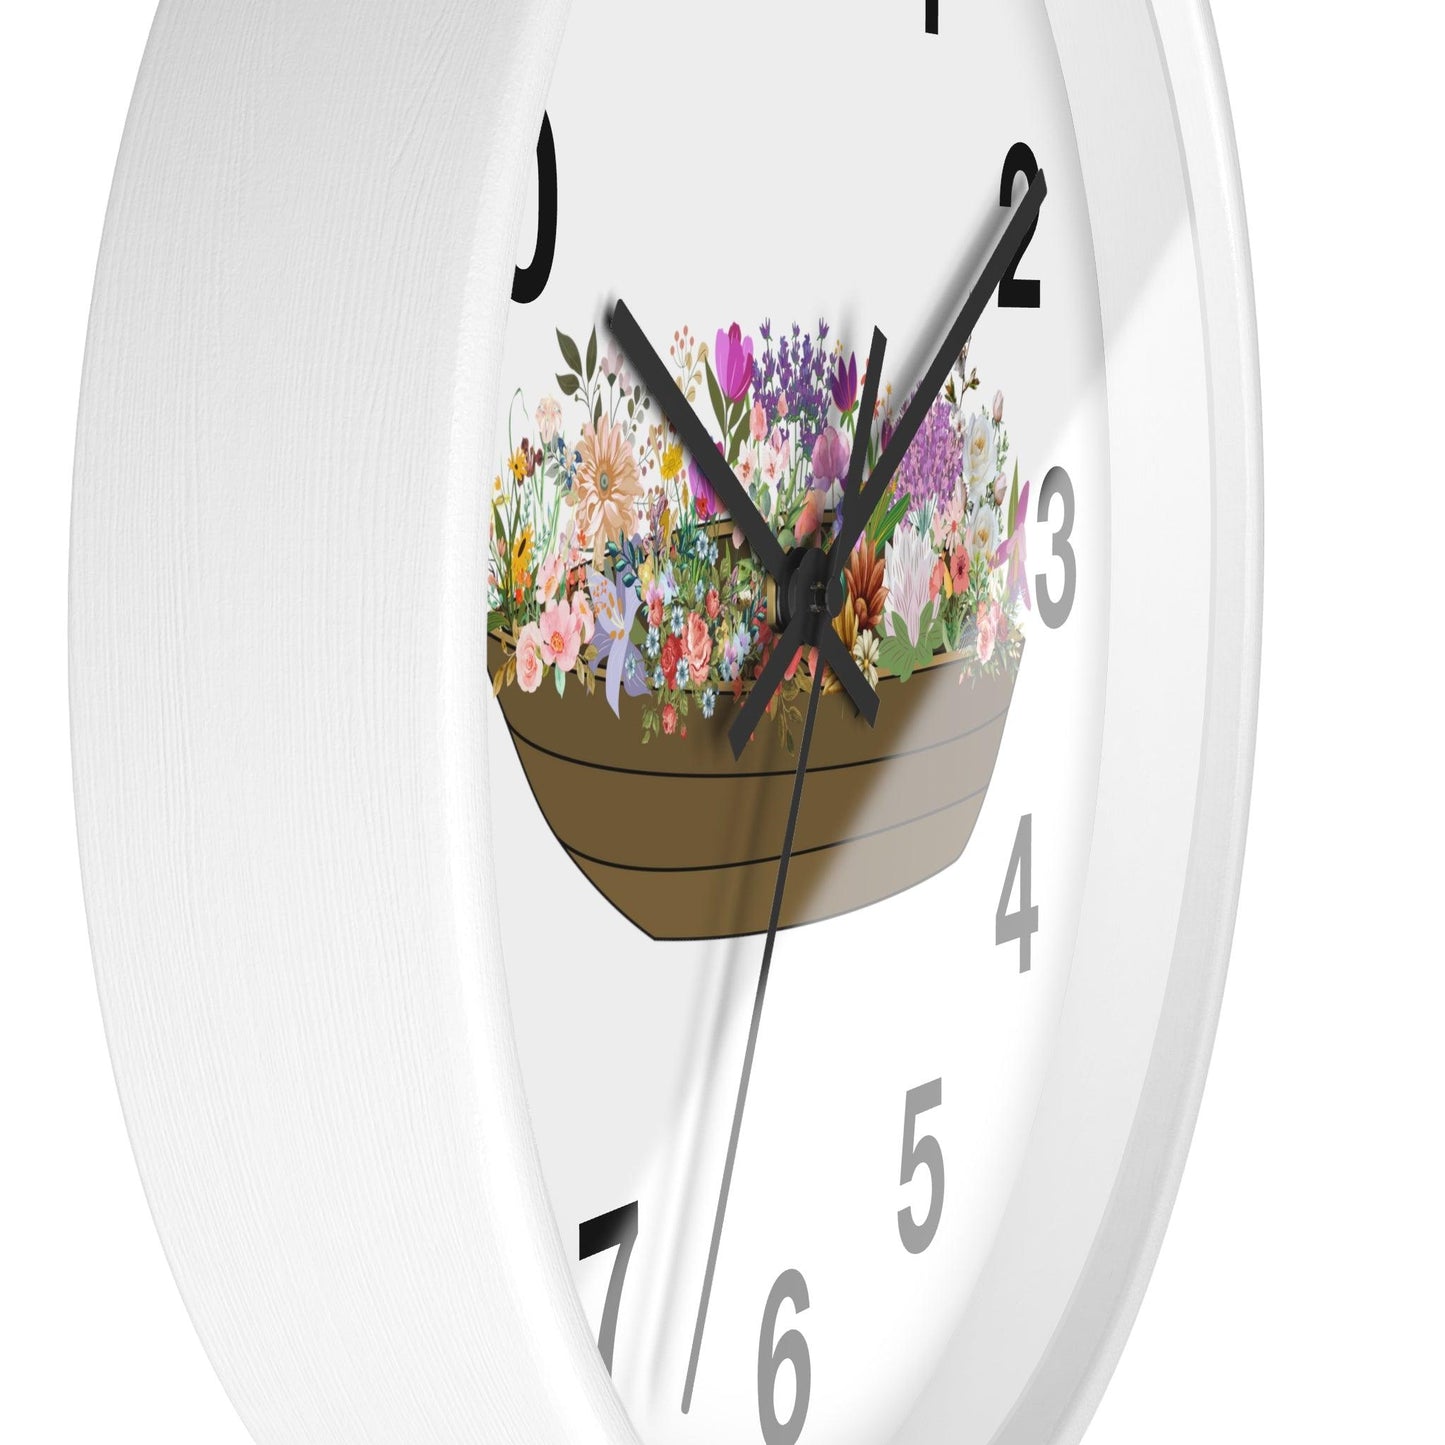 Boat Flower Wall Clock Floral Wall Clock Home Decor Gift House Warming gift - Unique Gift Farmhouse Clocks For Wall Living Room Bedroom